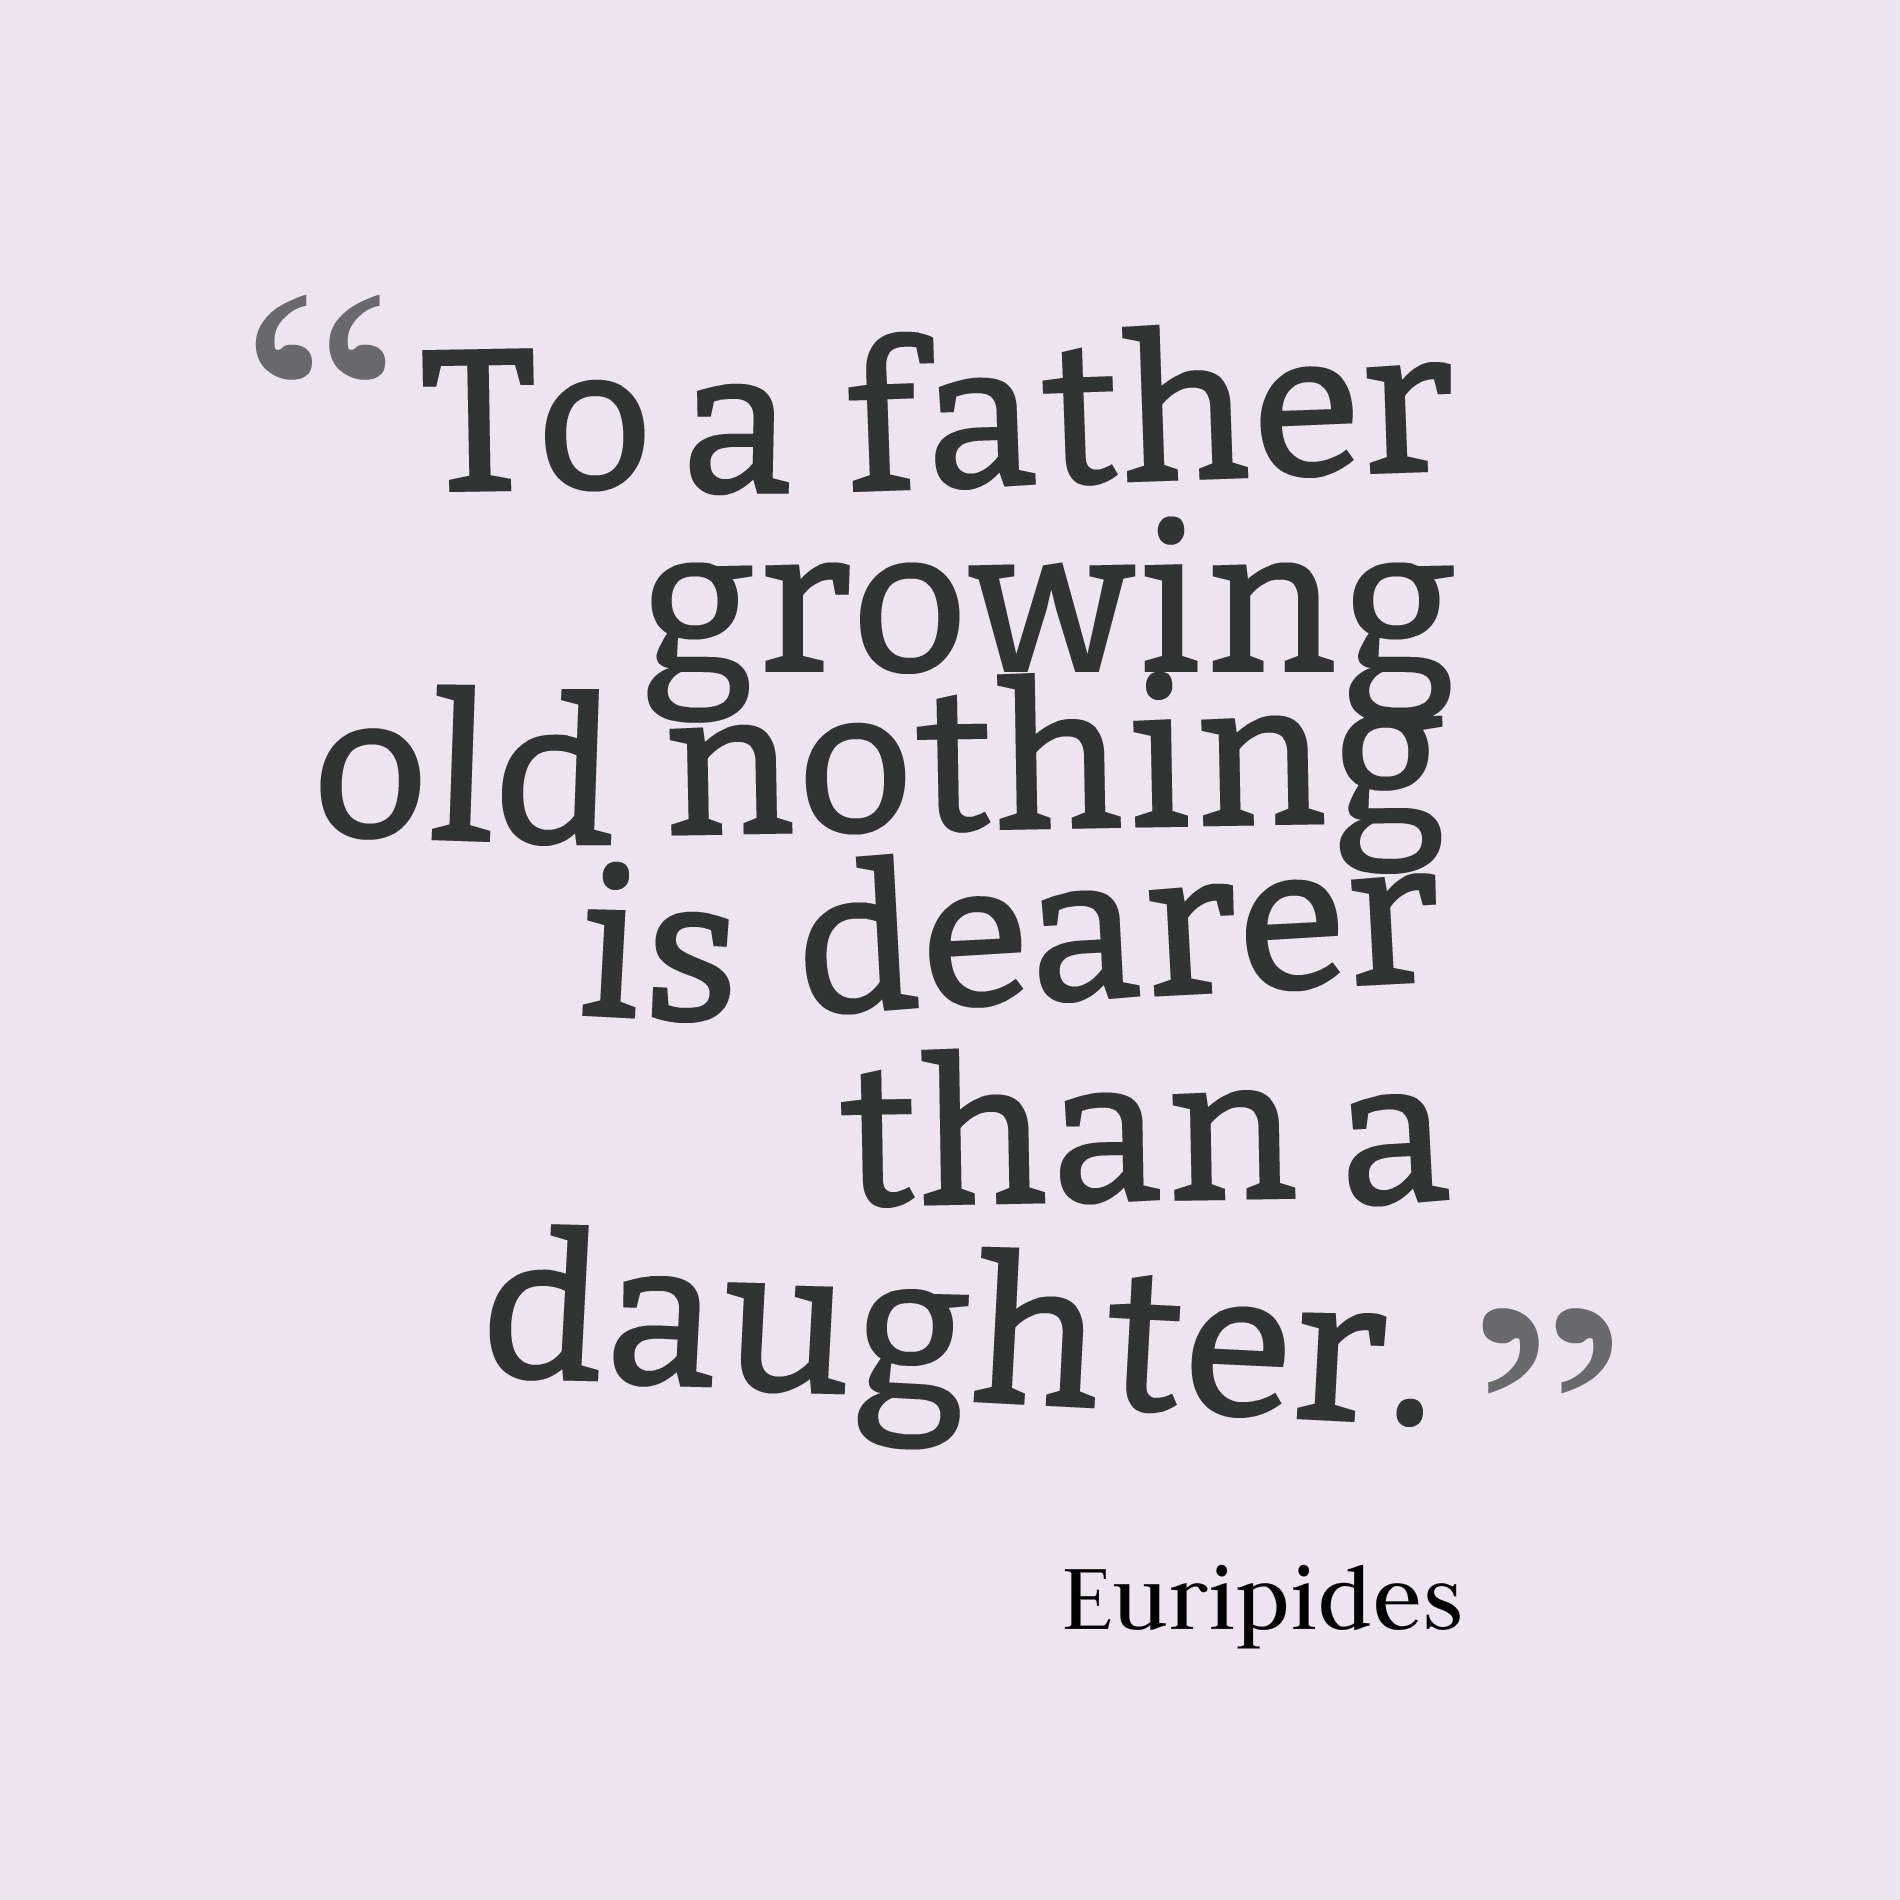 To a father growing old nothing is dearer than a daughter.